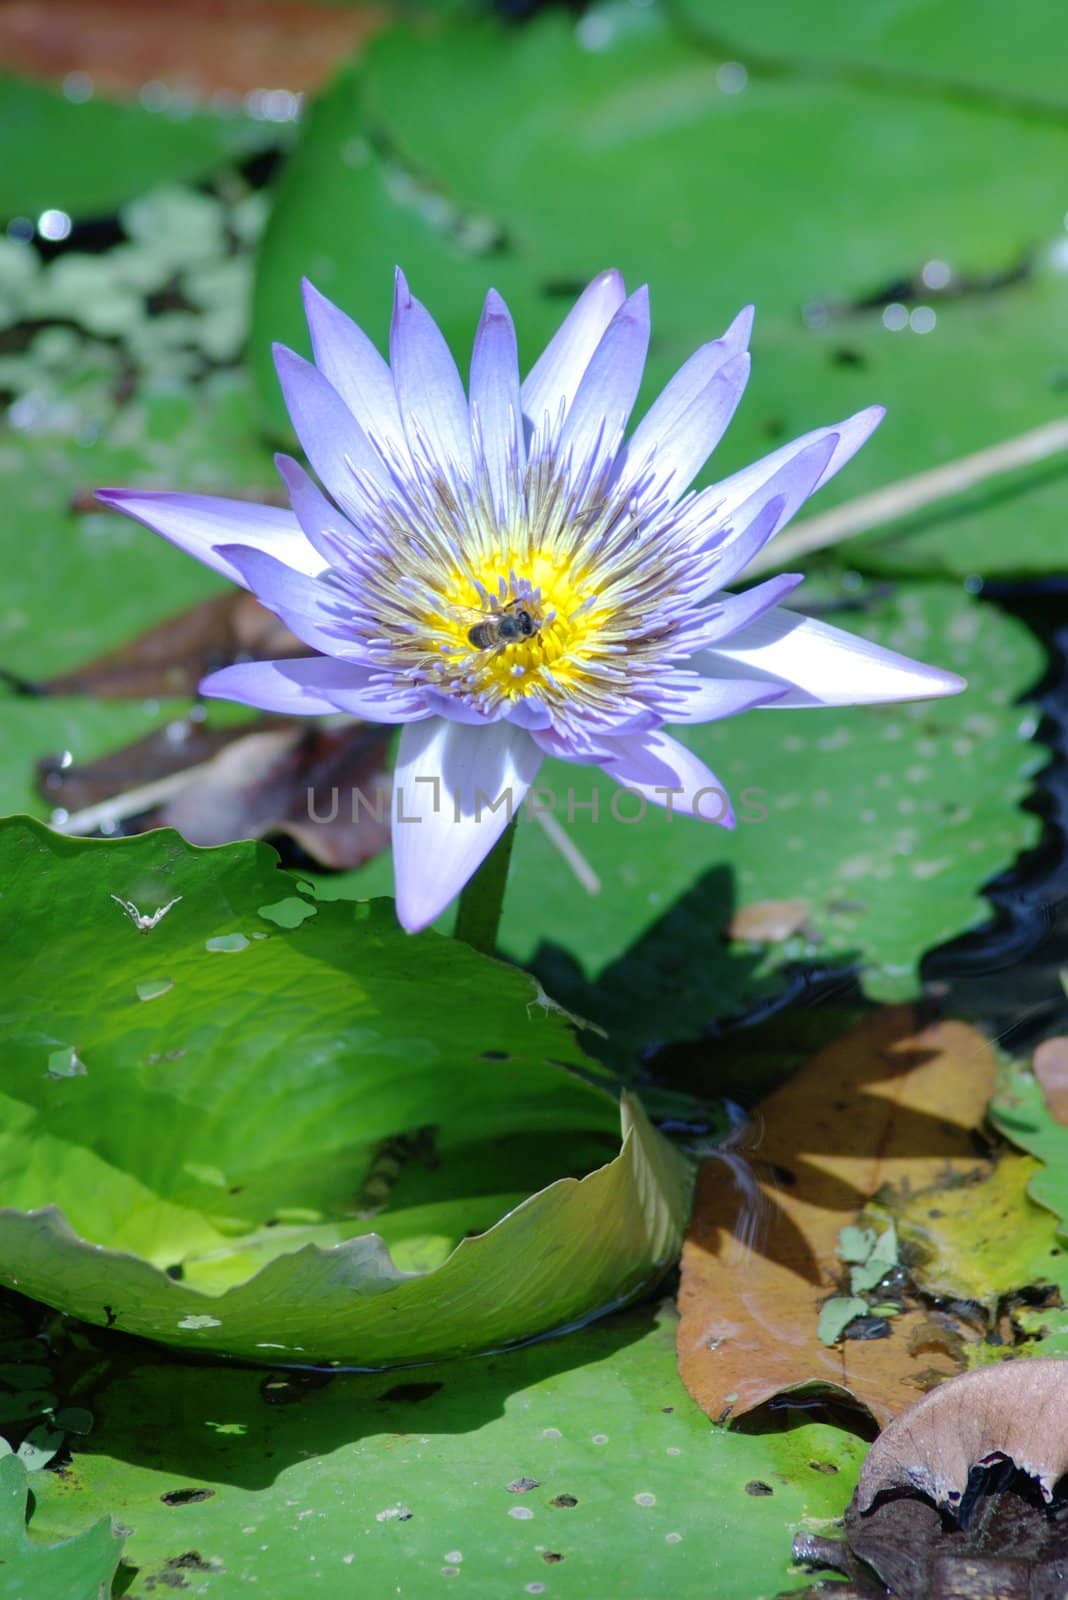 A bee is collecting pollen from the blue flower of water lily, an aquatic plant of the Nymphaea family